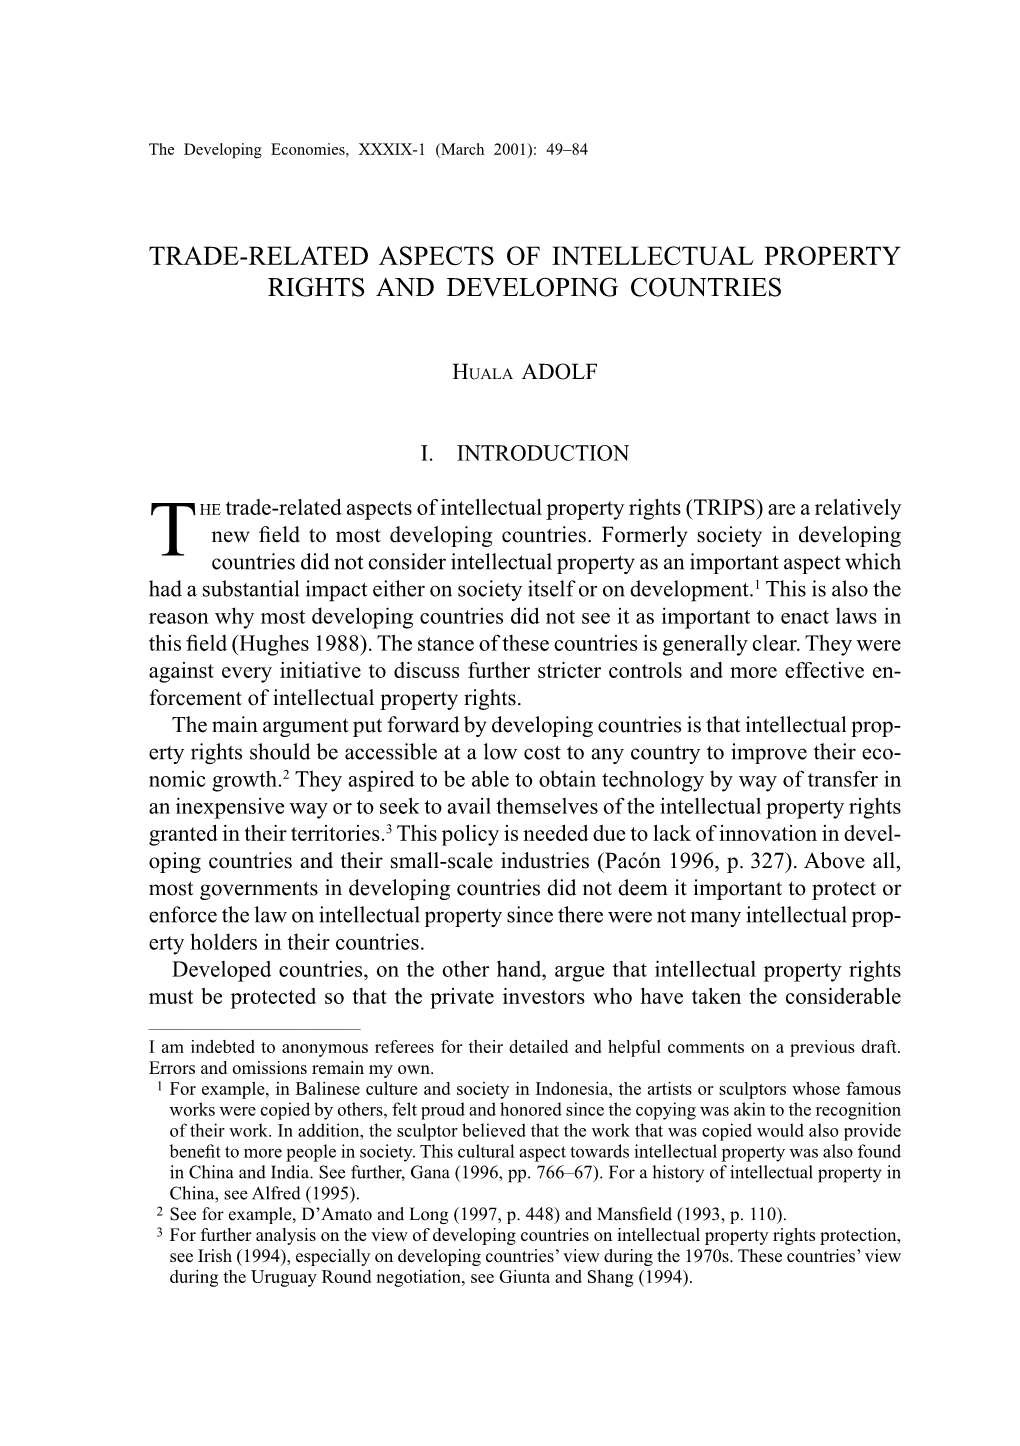 Trade-Related Aspects of Intellectual Property Rights and Developing Countries